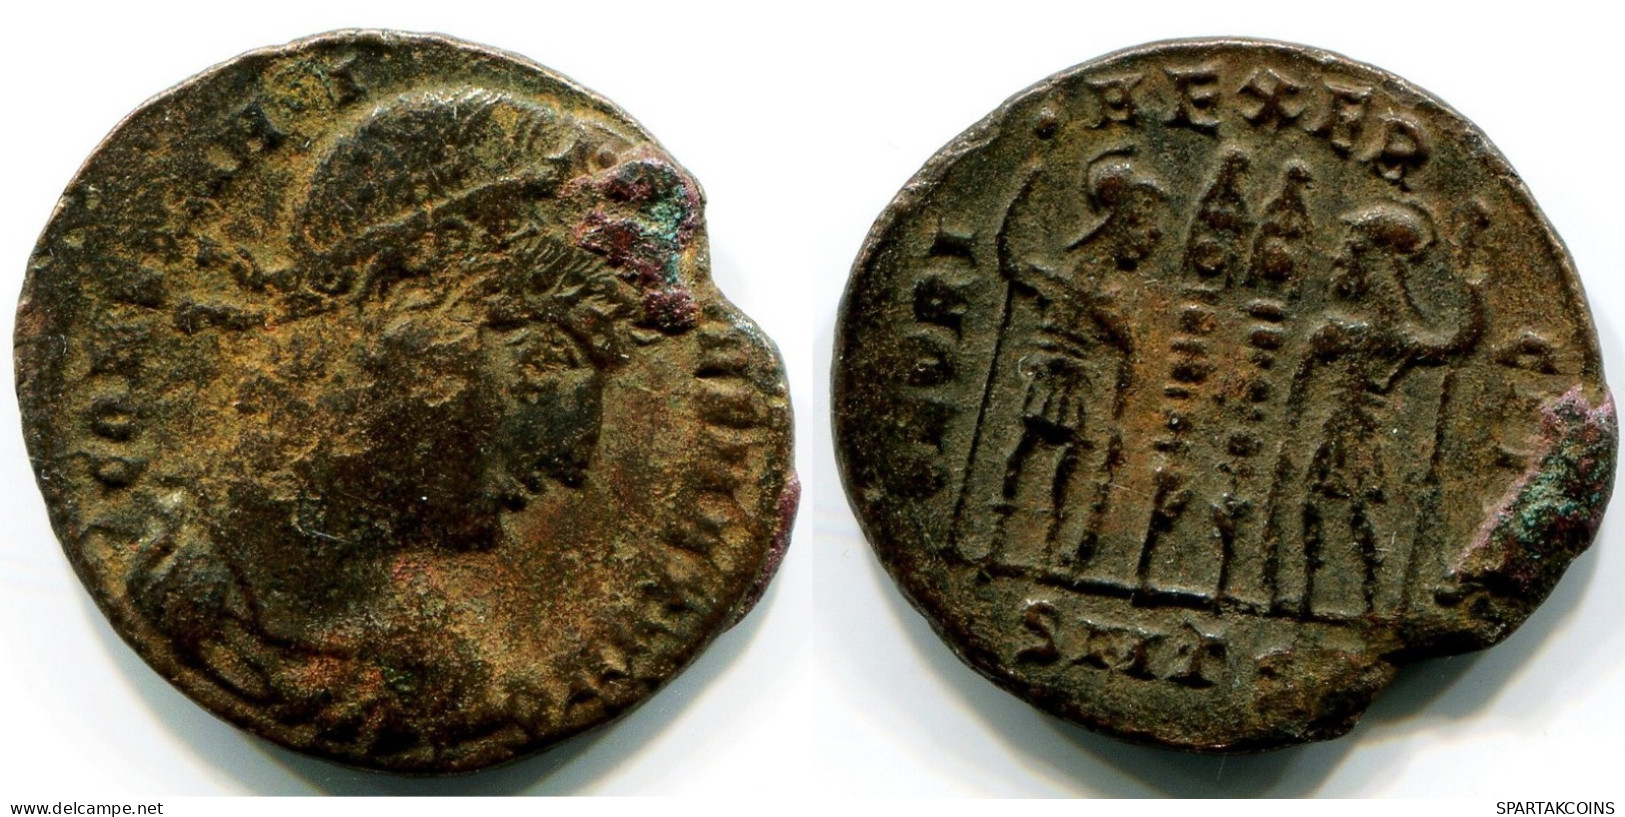 CONSTANTINE I MINTED IN THESSALONICA FOUND IN IHNASYAH HOARD #ANC11130.14.D.A - El Impero Christiano (307 / 363)